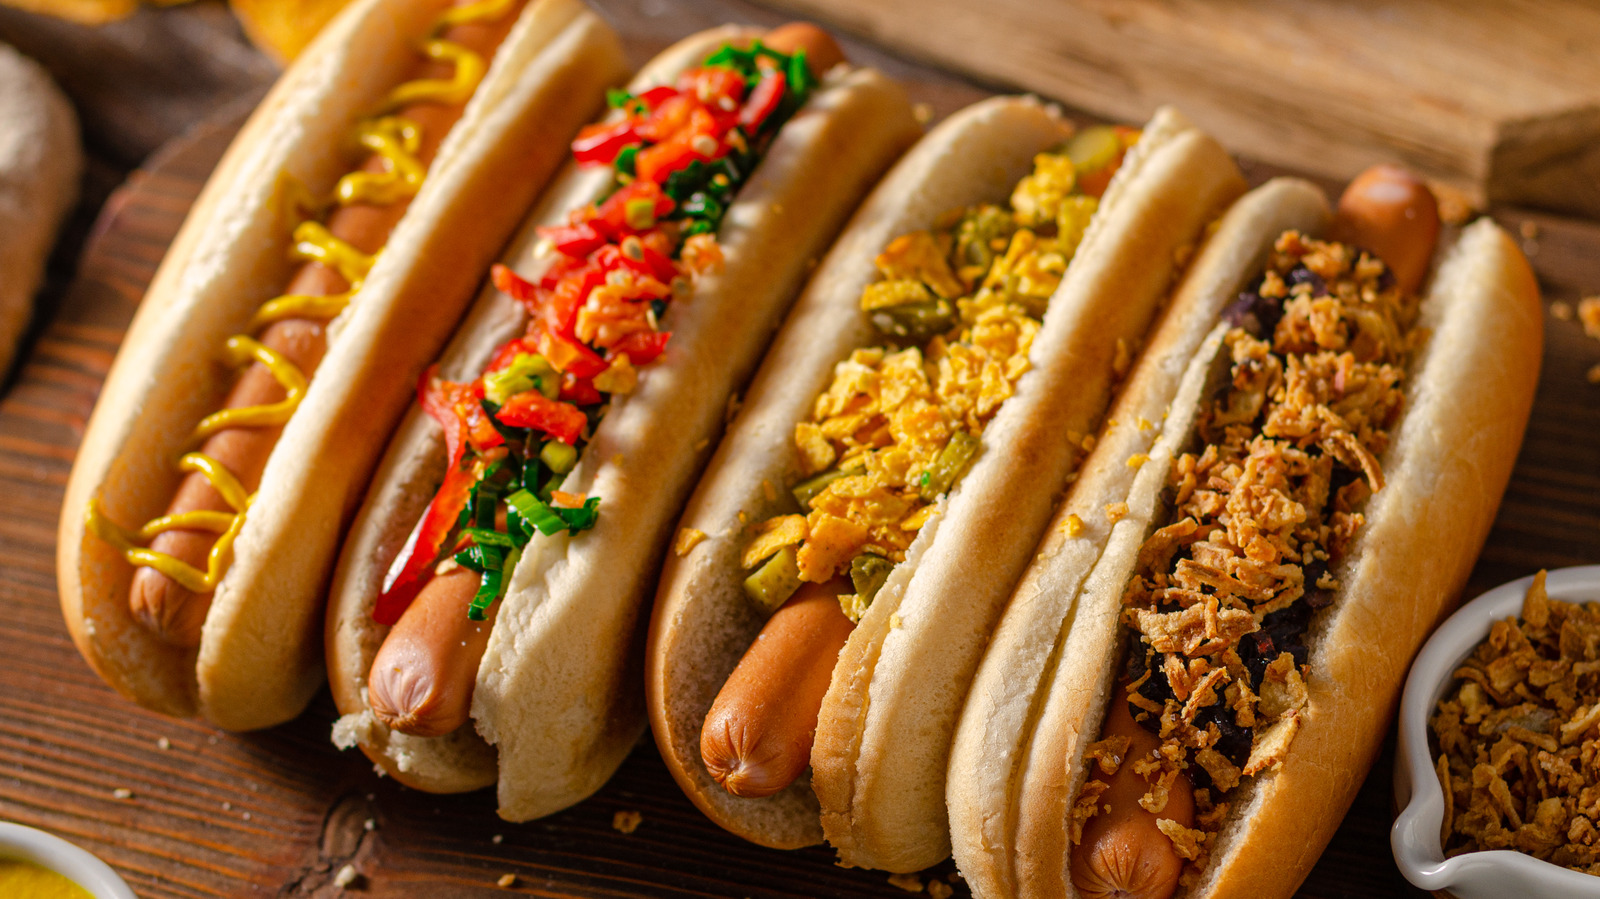 The savory story of hot dogs and America